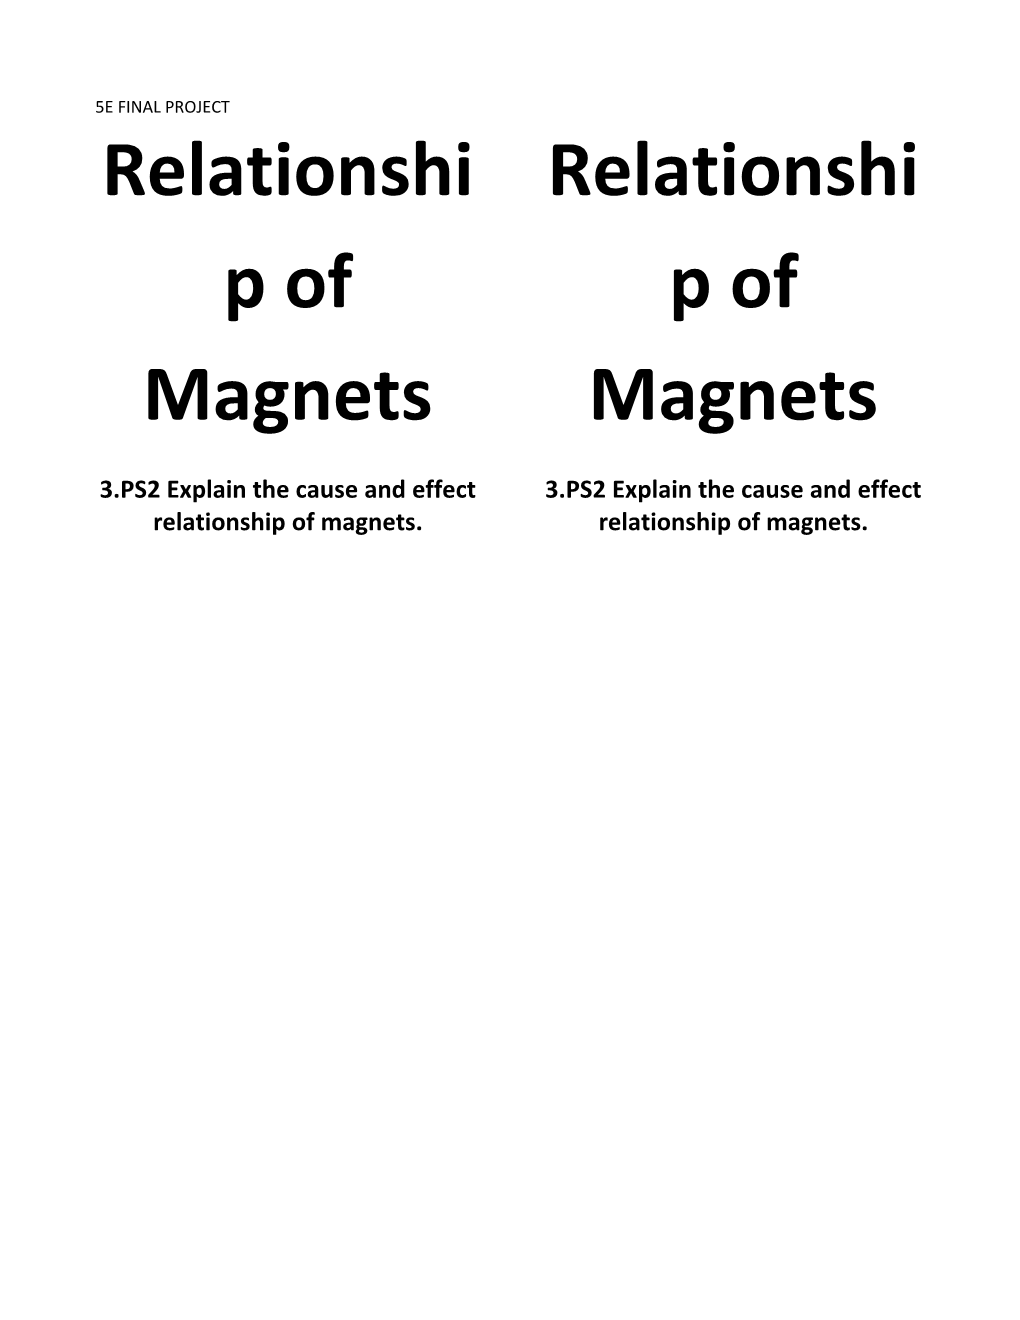 3.Ps2explain the Cause and Effect Relationship of Magnets